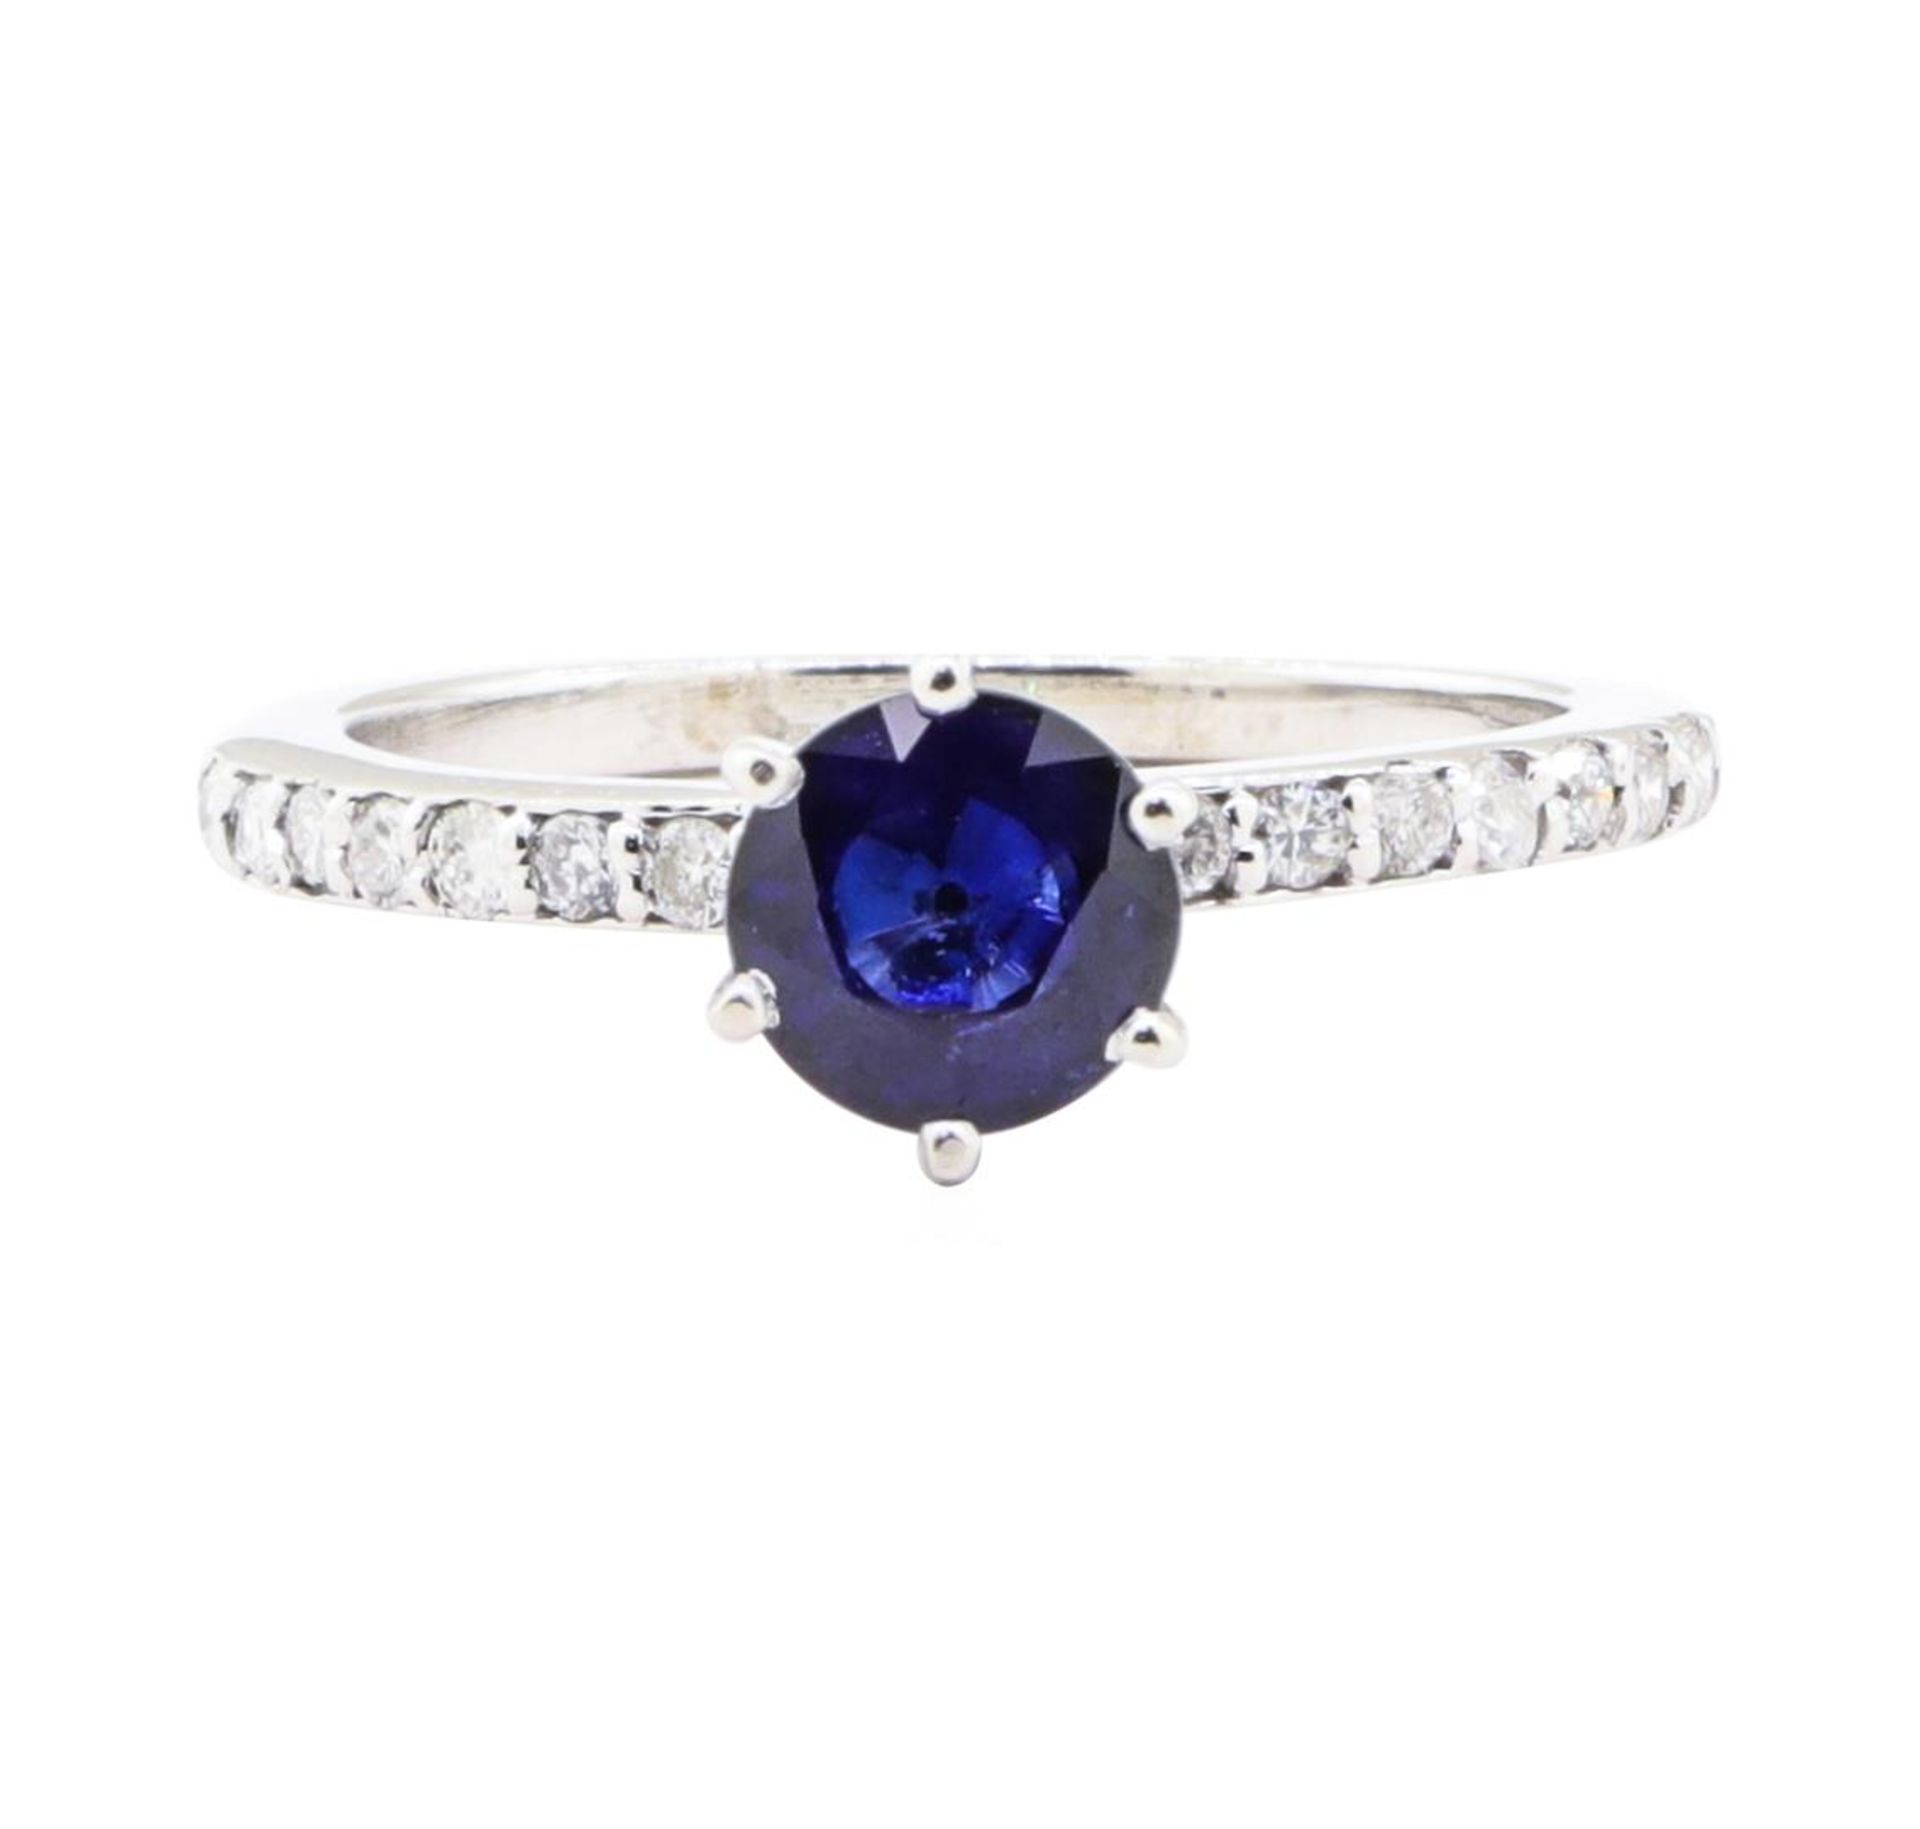 1.40 ctw Sapphire and Diamond Ring - 14KT White Gold - Image 2 of 4